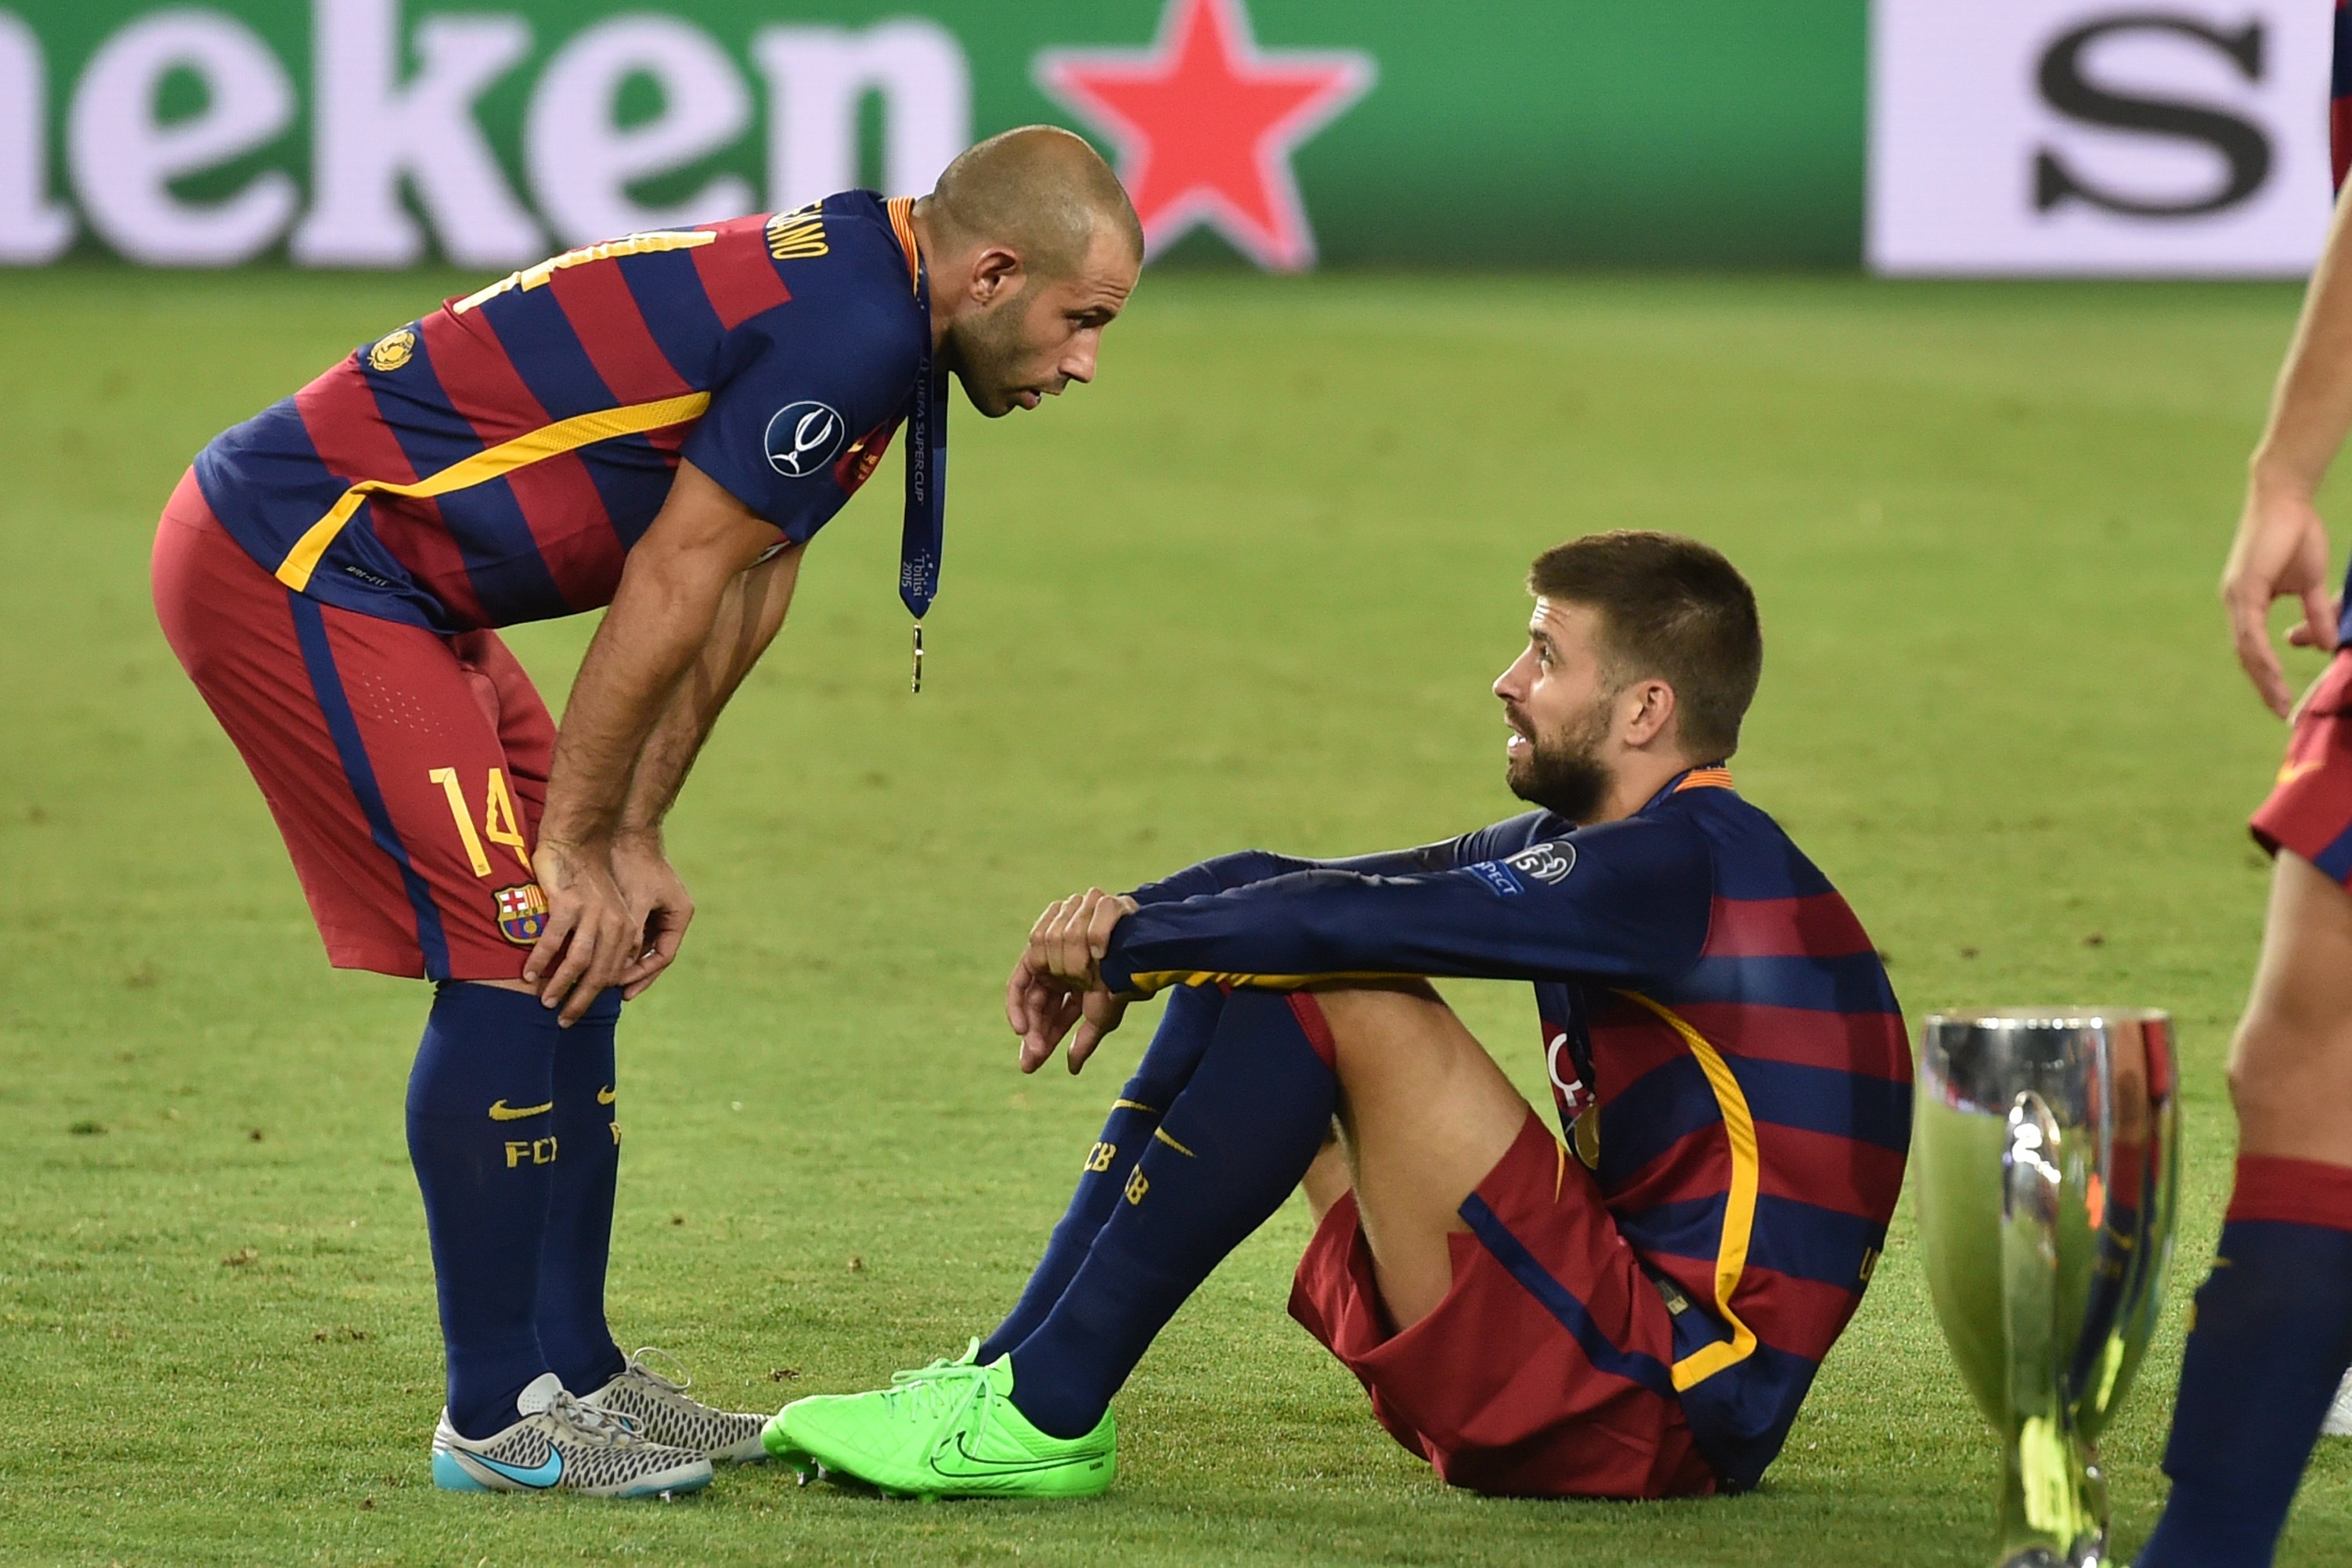 Barcelona's Spanish defender Gerard Pique and Barcelona's Argentinian defender Javier Mascherano (L) react after winning the UEFA Super Cup final football match between FC Barcelona and Sevilla FC on August 11, 2015 at the Boris Paichadze Dinamo Arena in Tbilisi. AFP PHOTO / KIRILL KUDRYAVTSEV        (Photo credit should read KIRILL KUDRYAVTSEV/AFP/Getty Images)